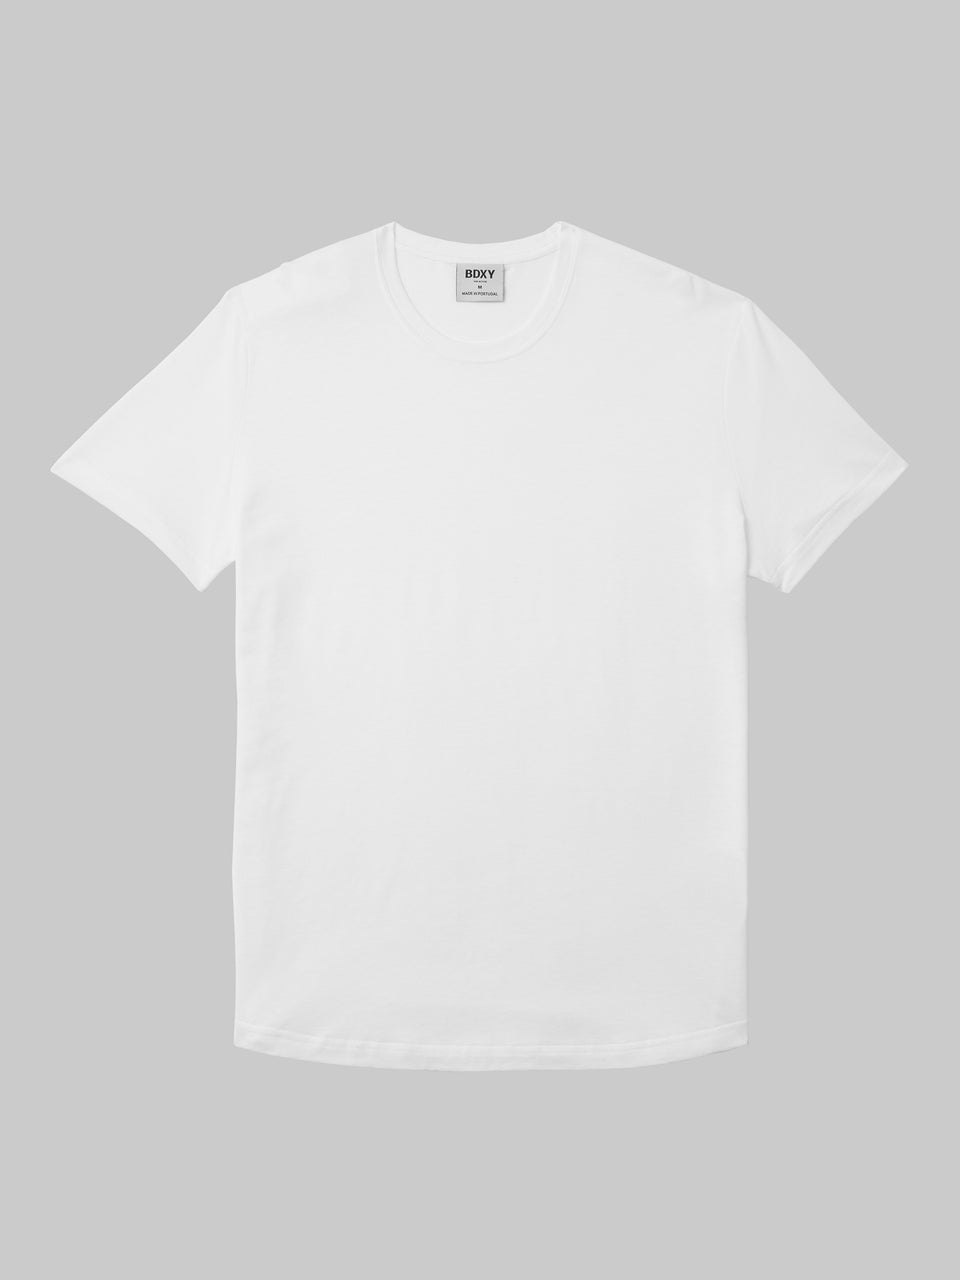 'The Actor' T-shirt - White